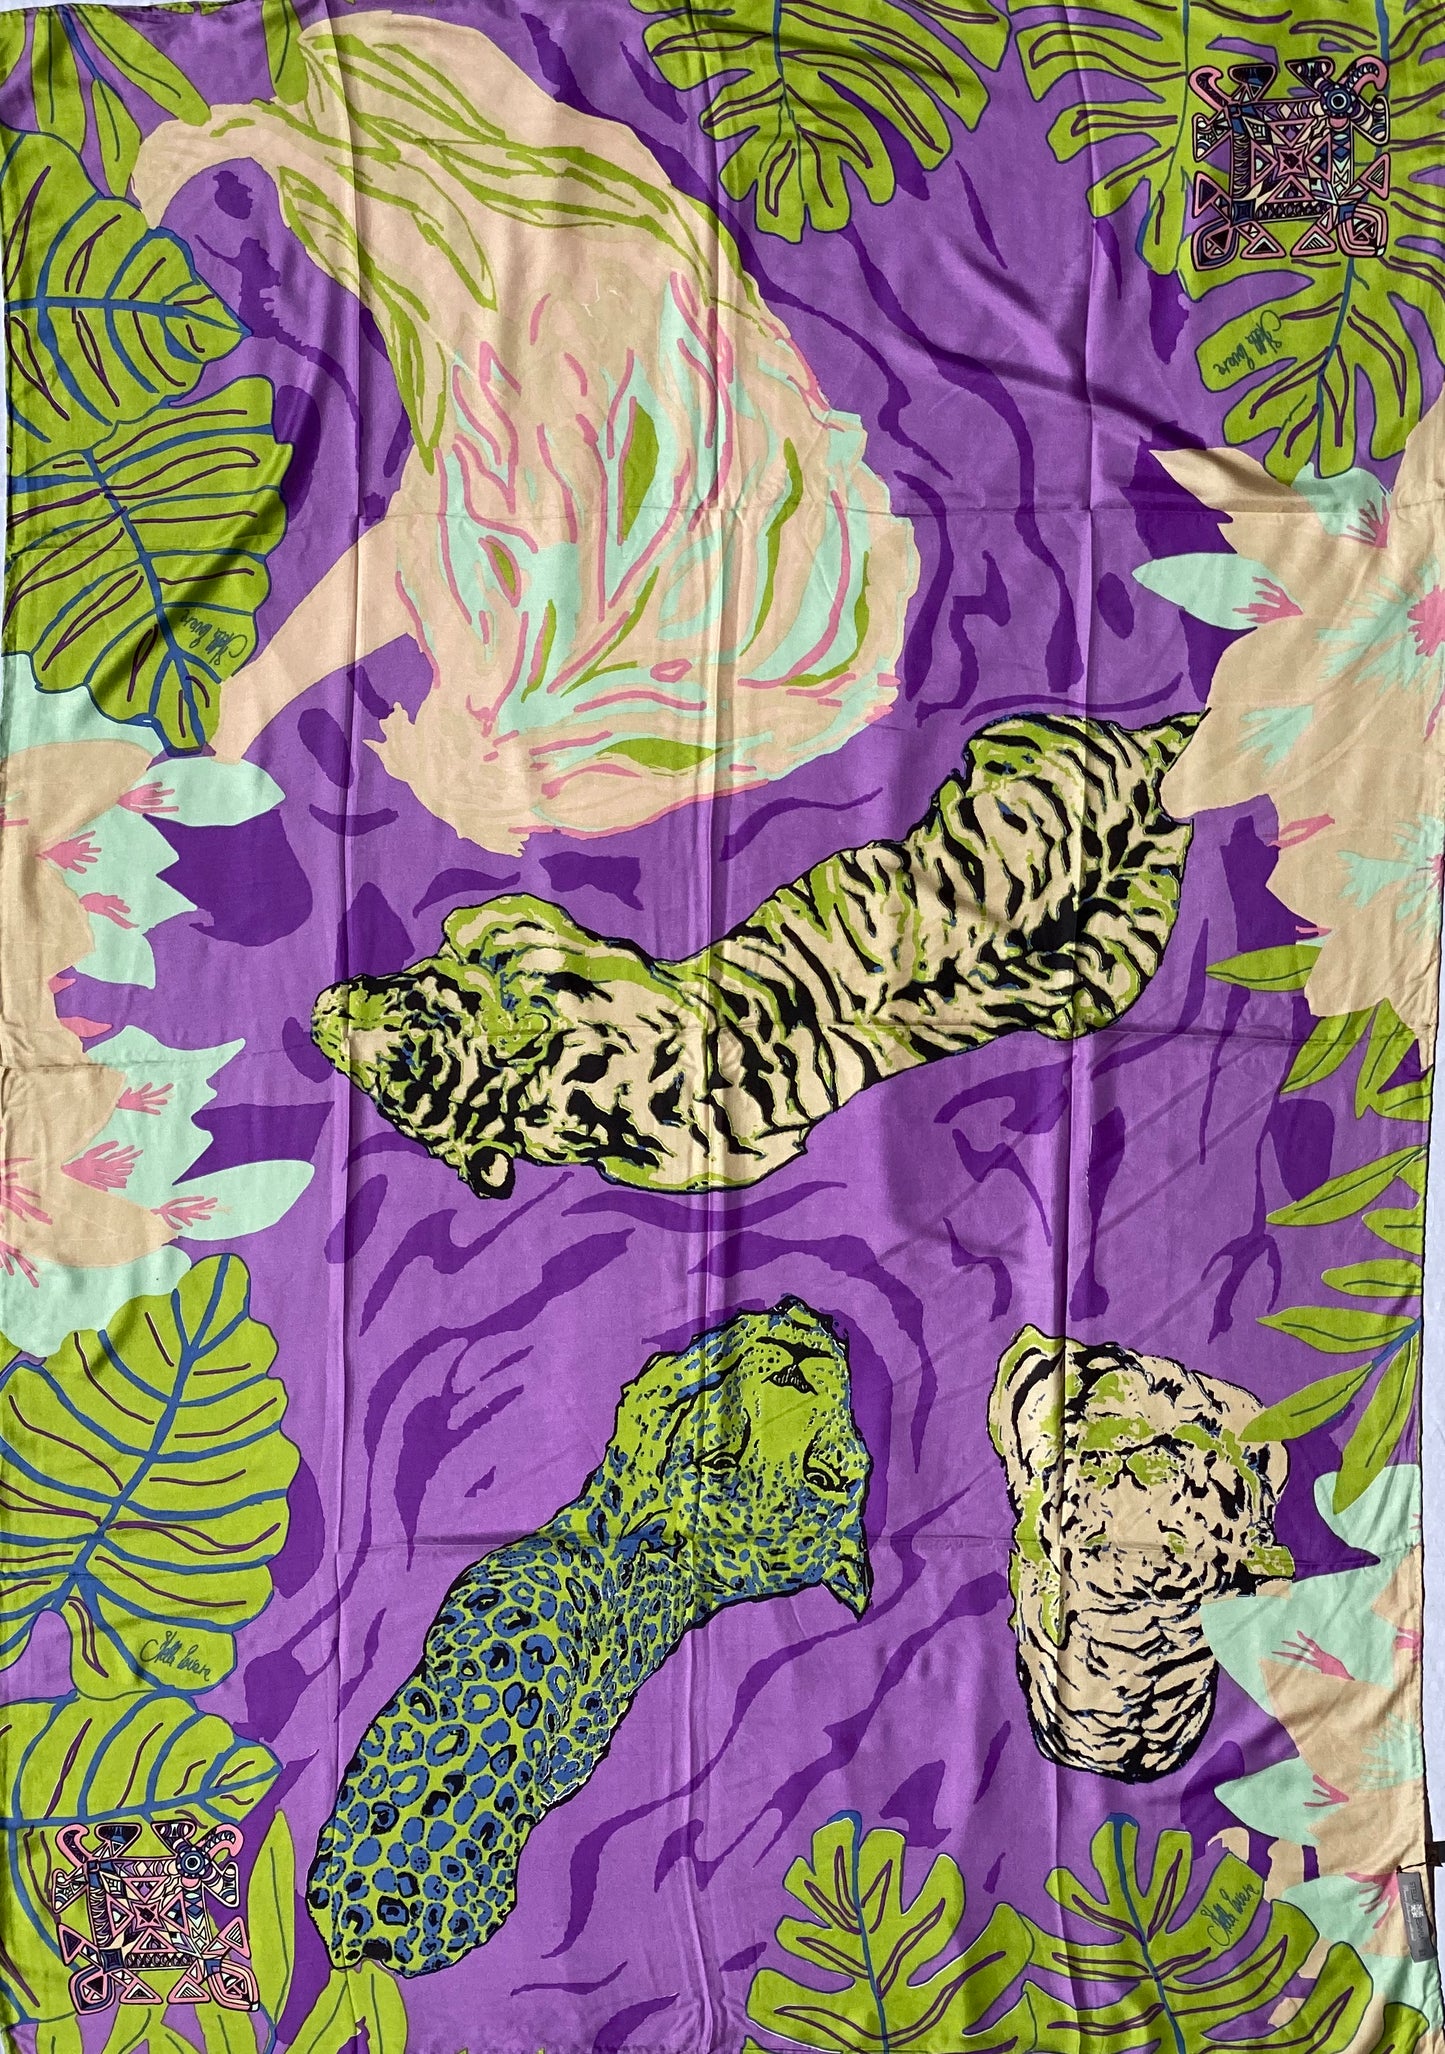 TIGER POND - United in diversity - XL cashmere scarf - purple &amp; green - Limited Edition